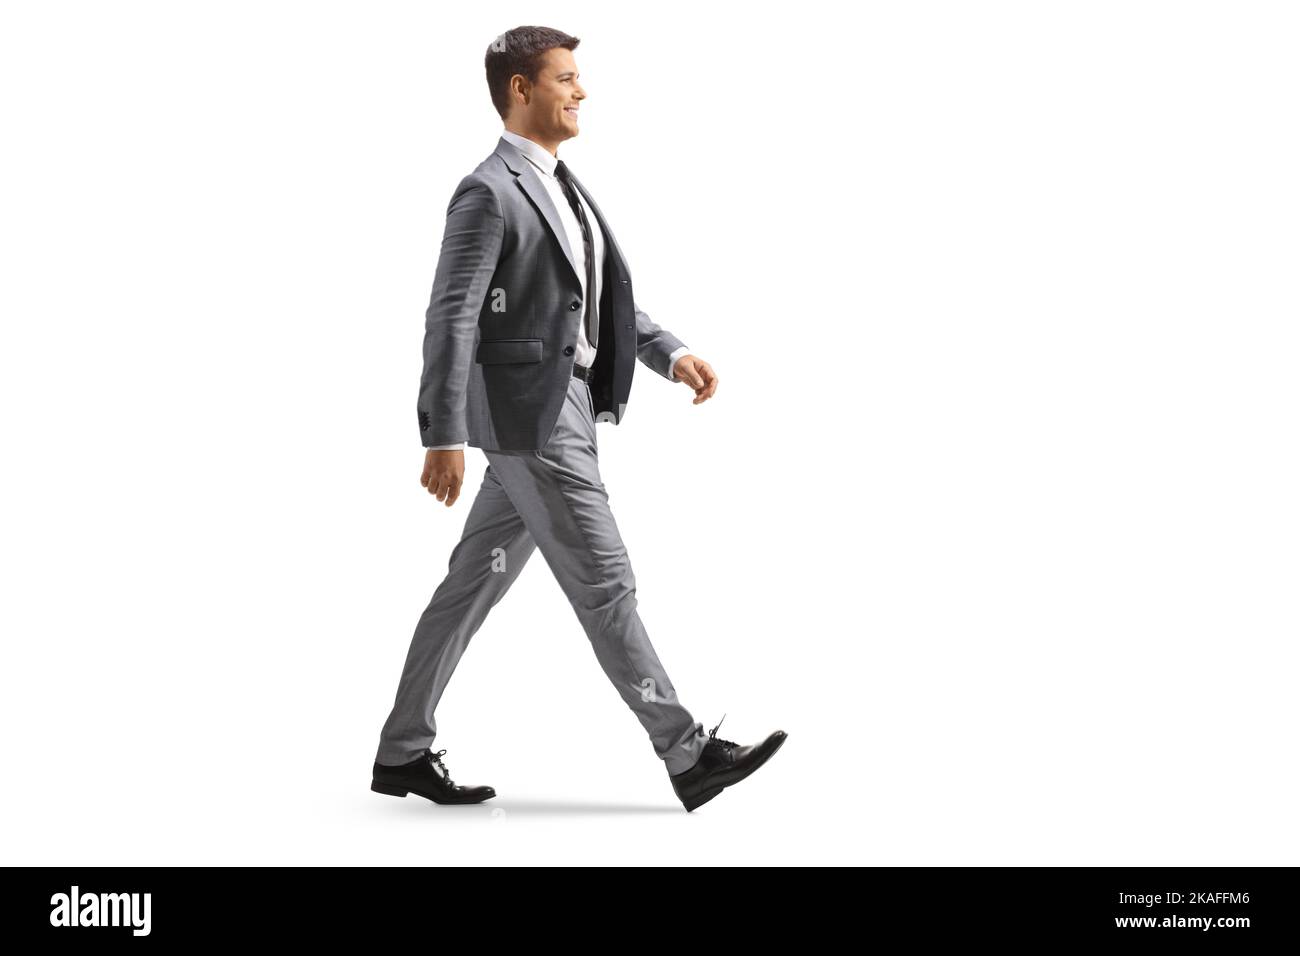 Full length profile shot of a young professional man in a gray suit walking isolated on white background Stock Photo